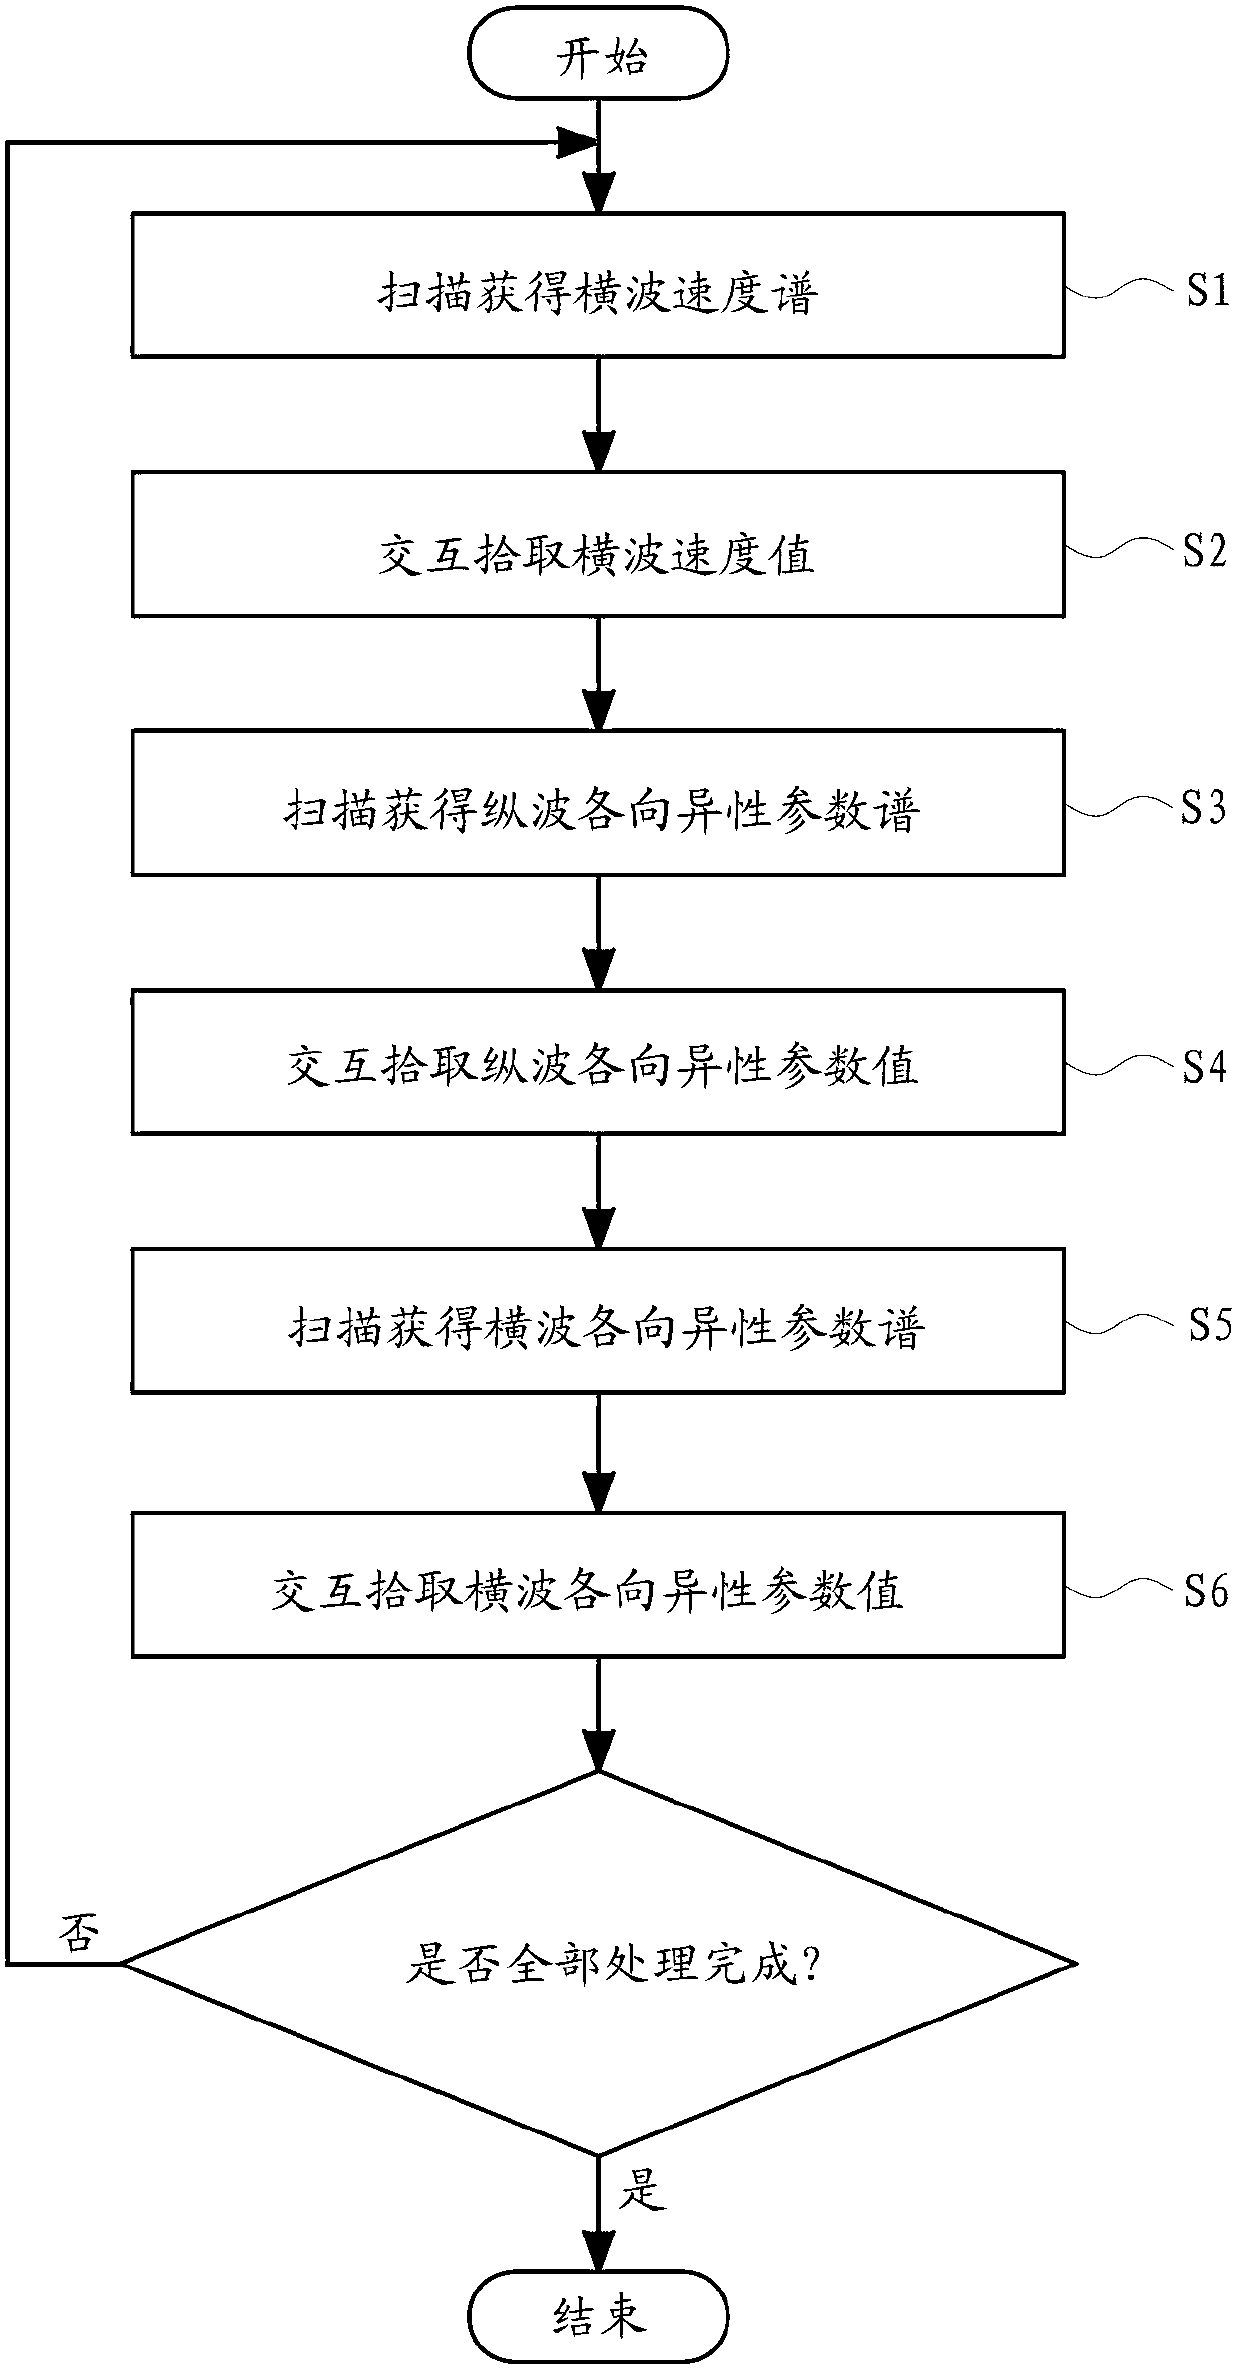 High-precision converted wave anisotropy stacking velocity analysis method